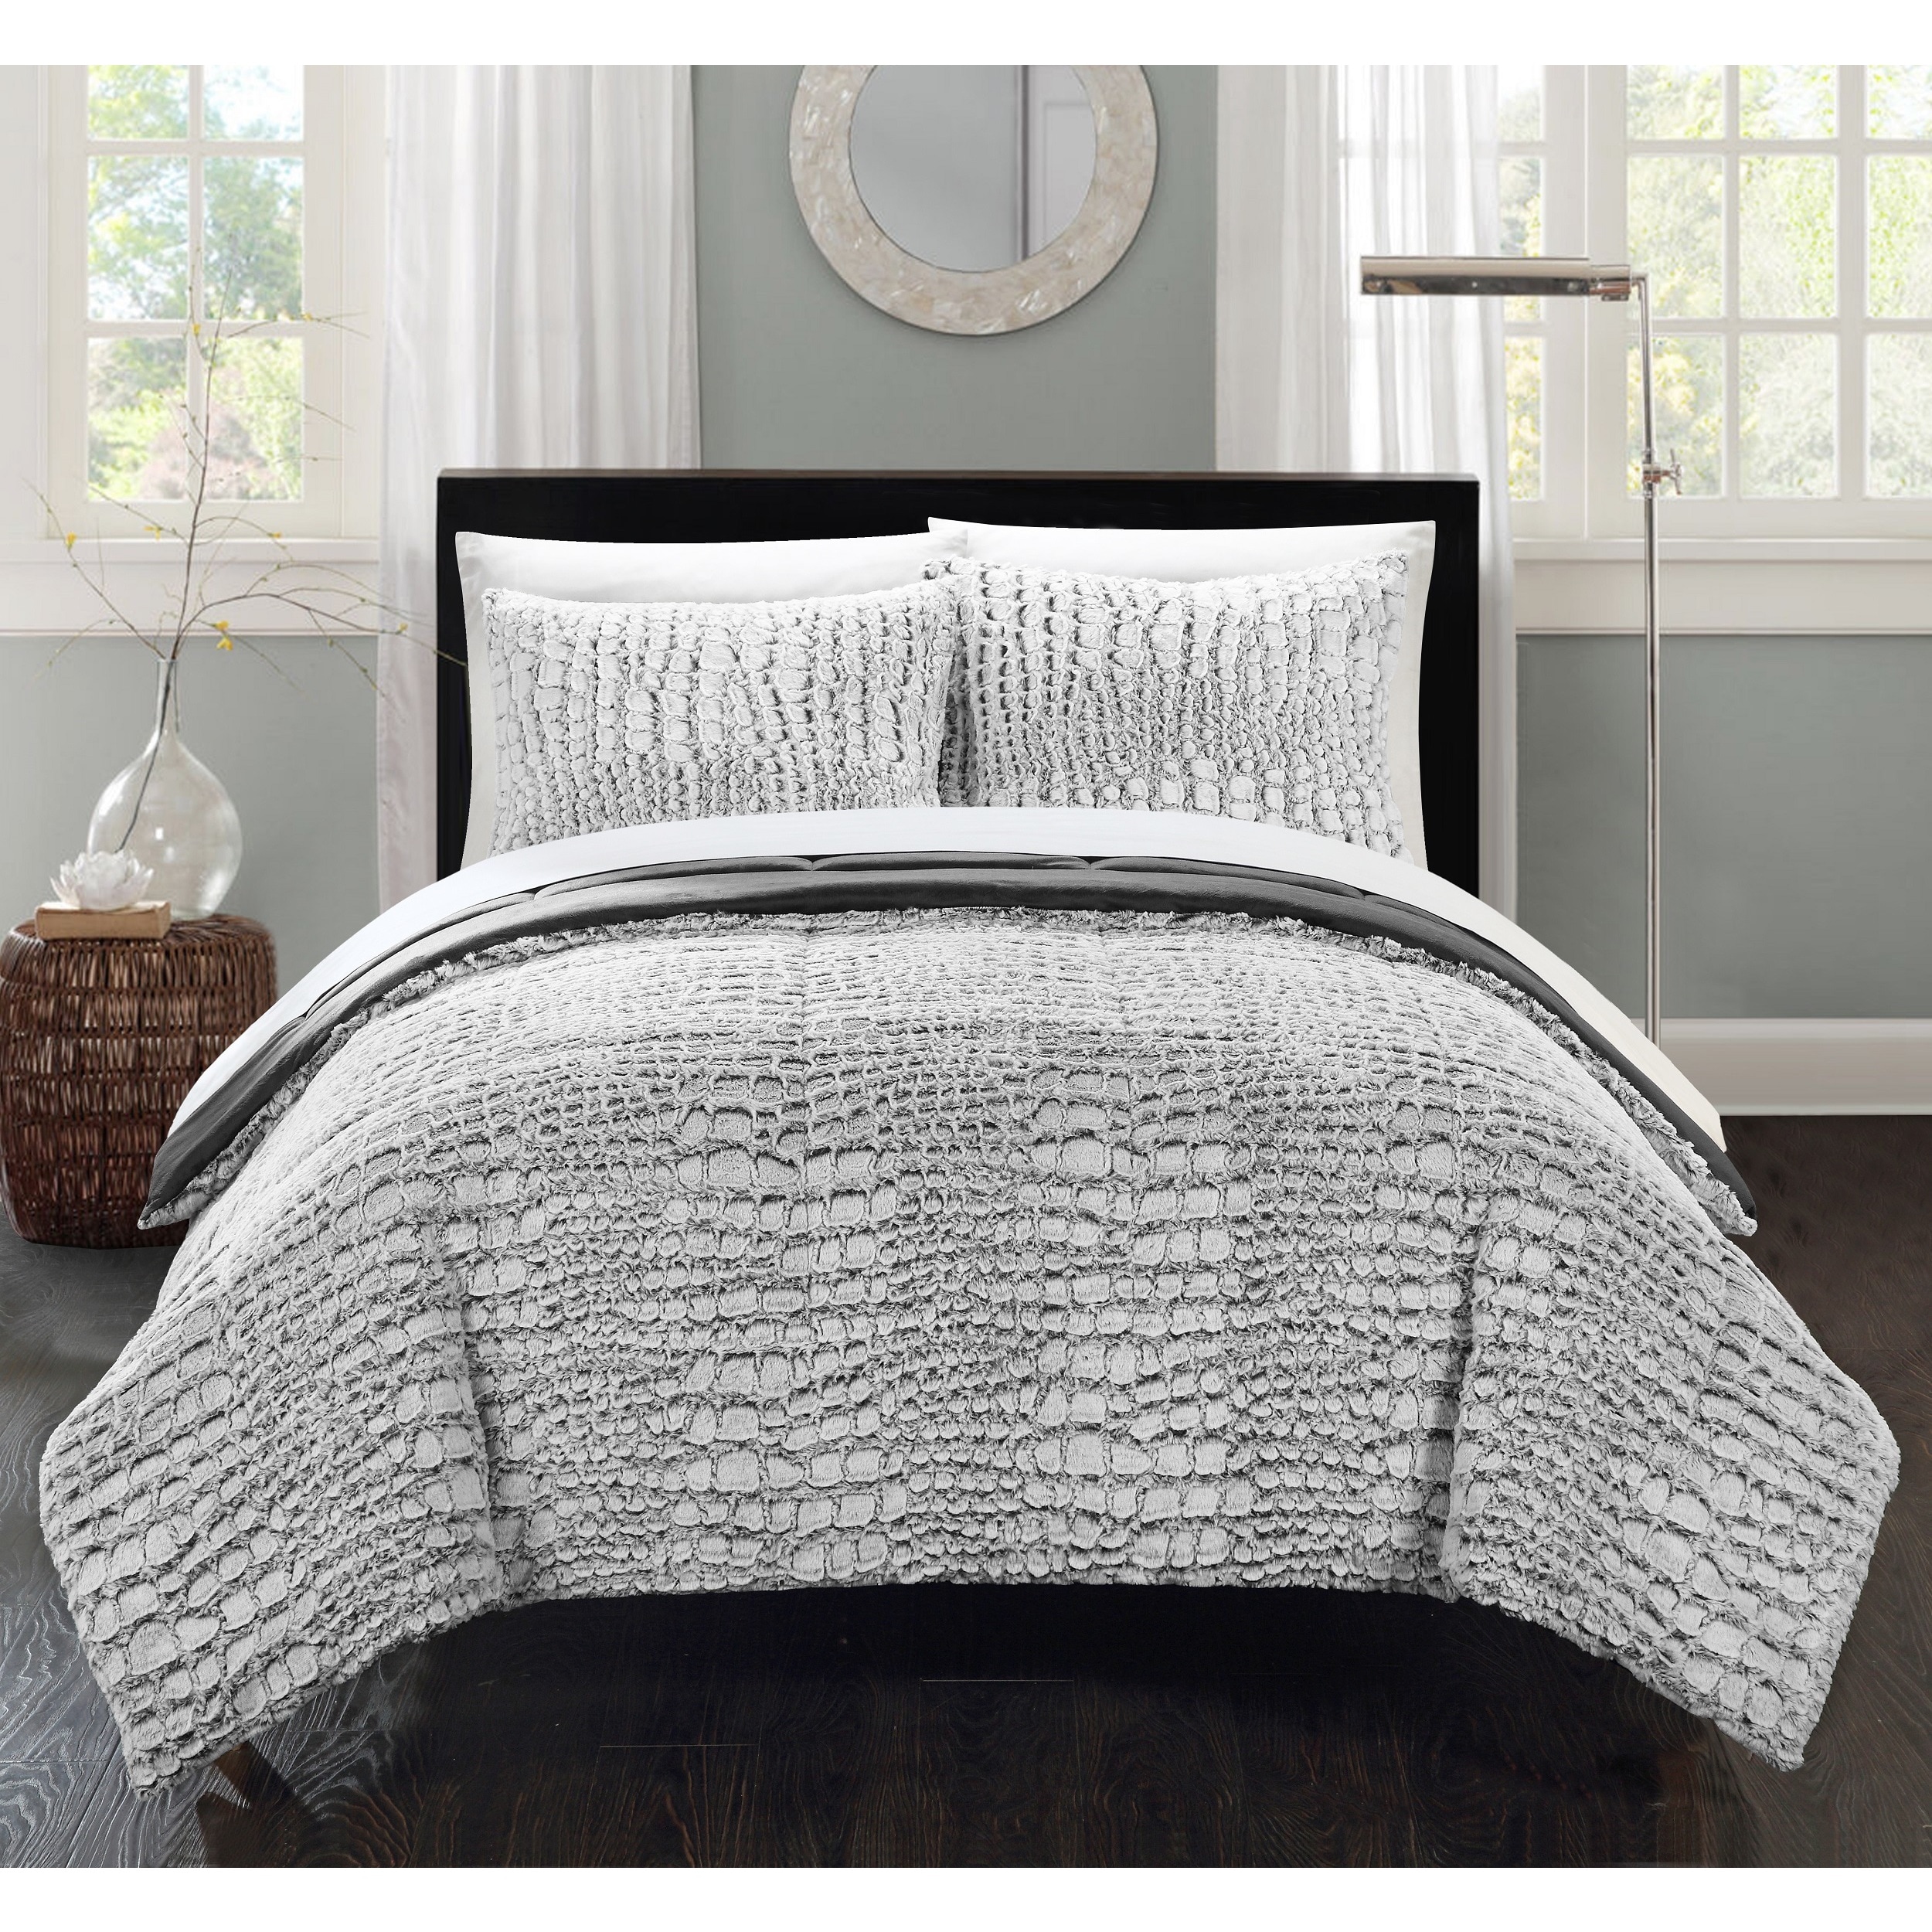 Life at Home Faux-Fur Ribbed Comforter 3-Piece Set Full/Queen